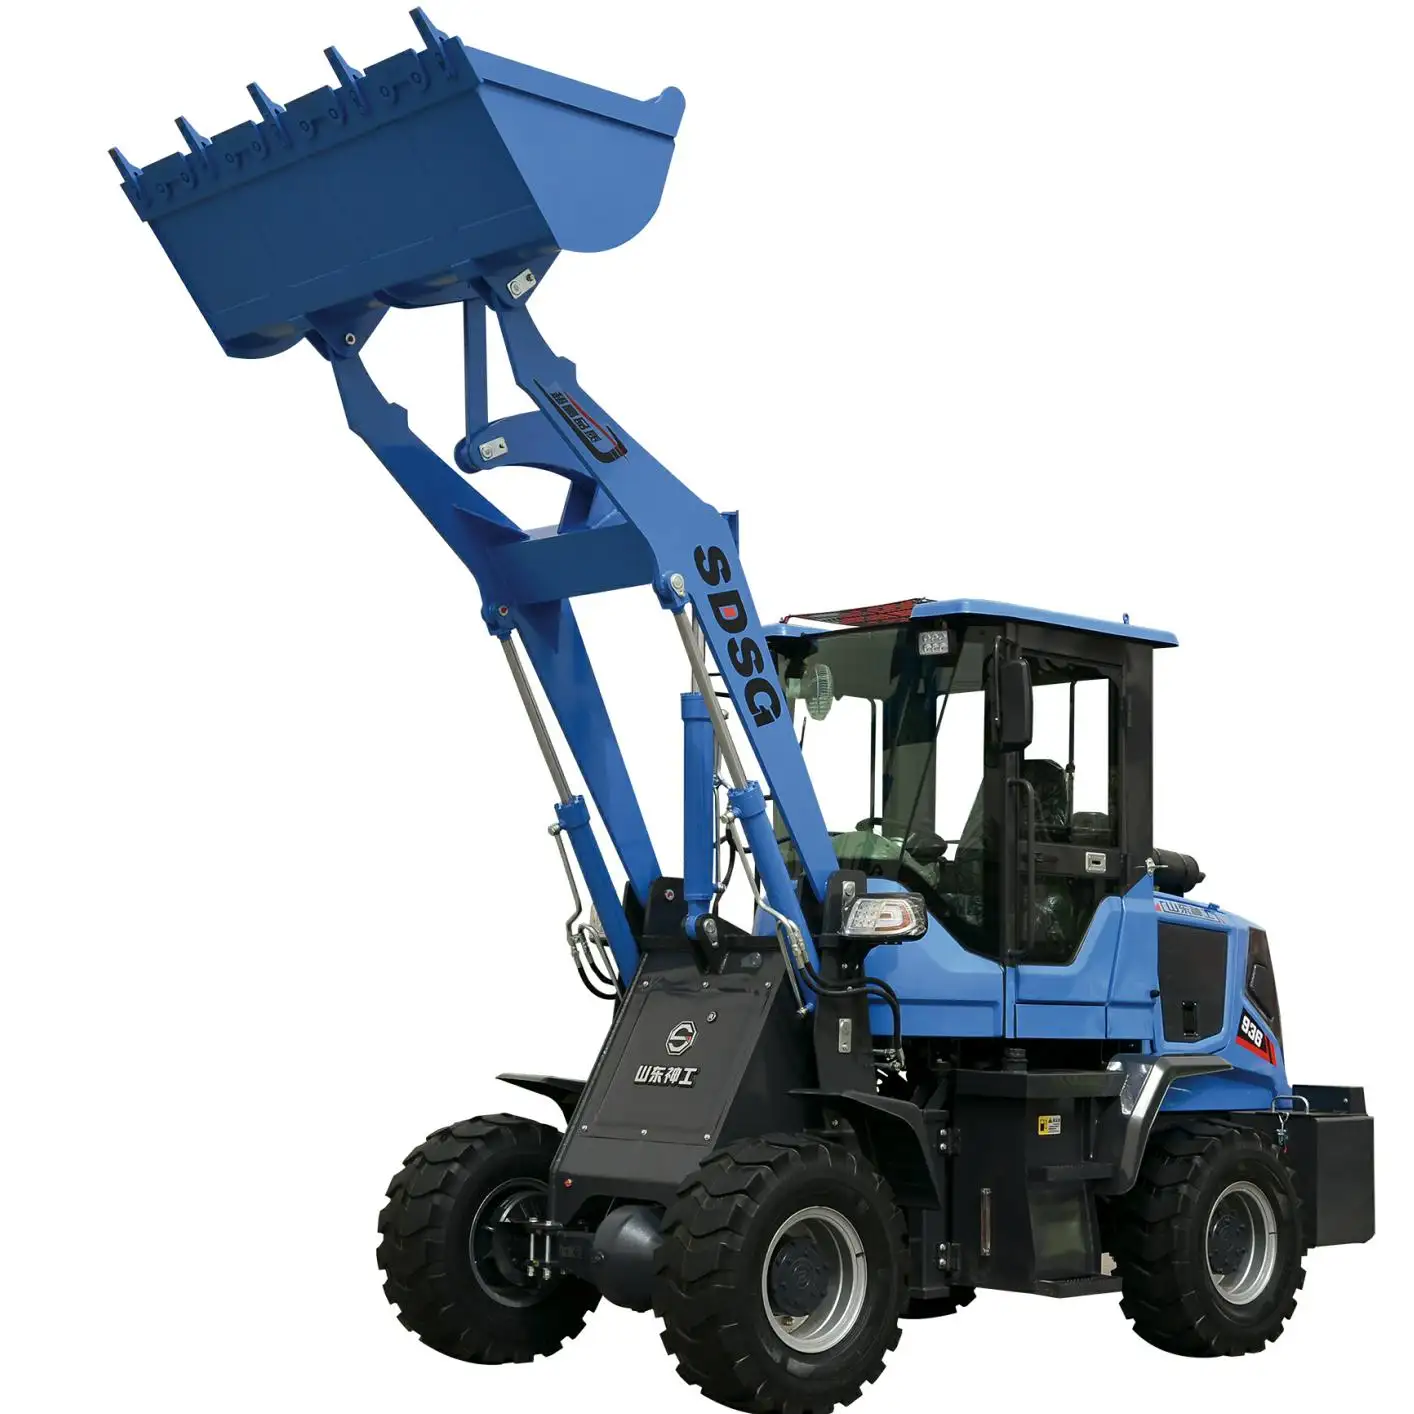 Heavy construction machinery 2 ton SDSG loader Front loader SG938 four-wheel drive wheel loader suitable for construction sites,